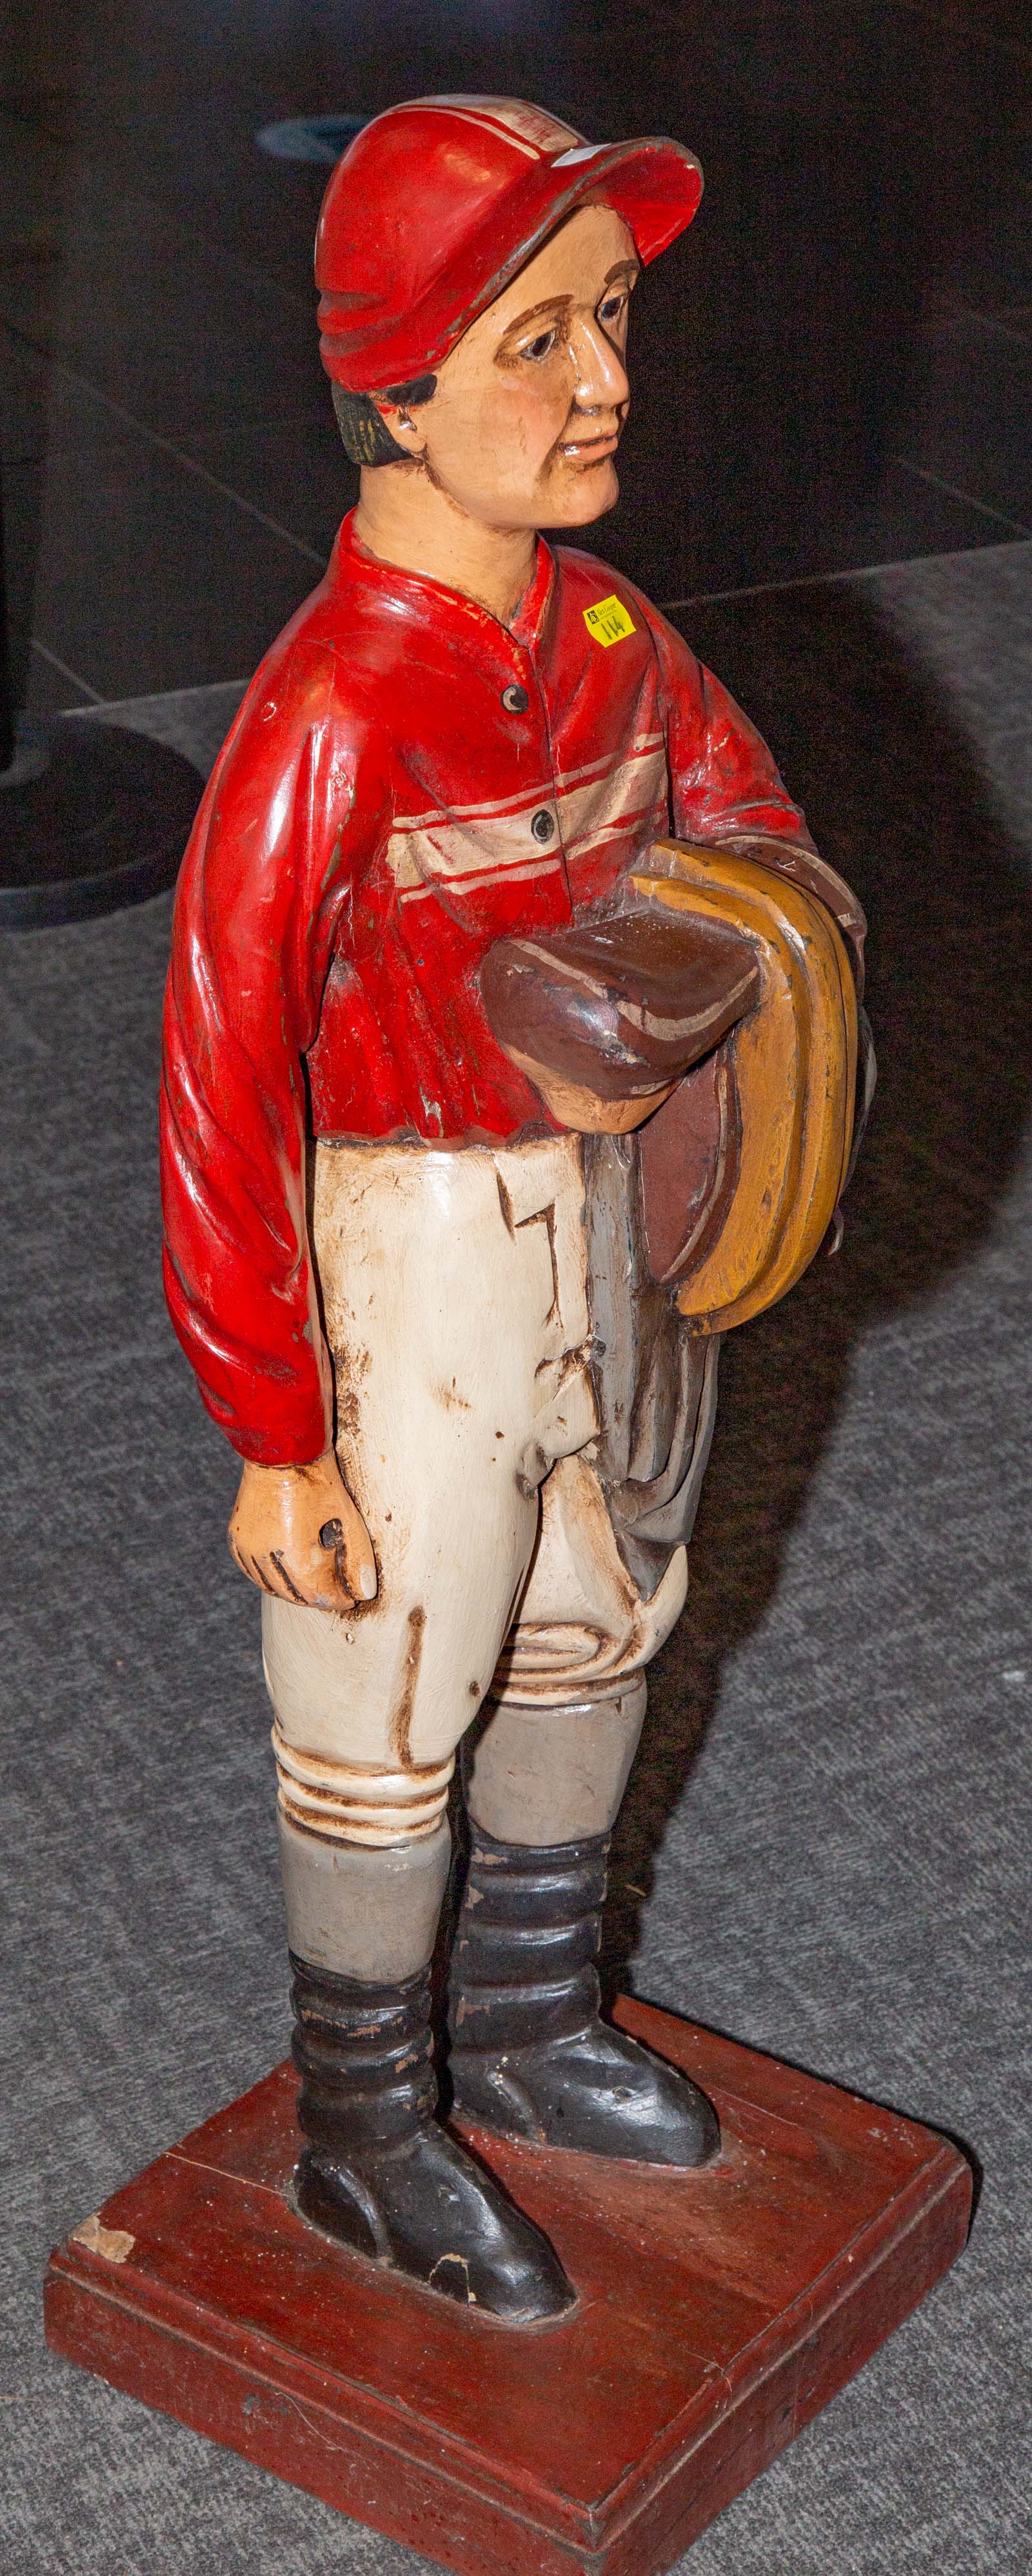 CARVED PAINTED WOODEN JOCKEY 28986f